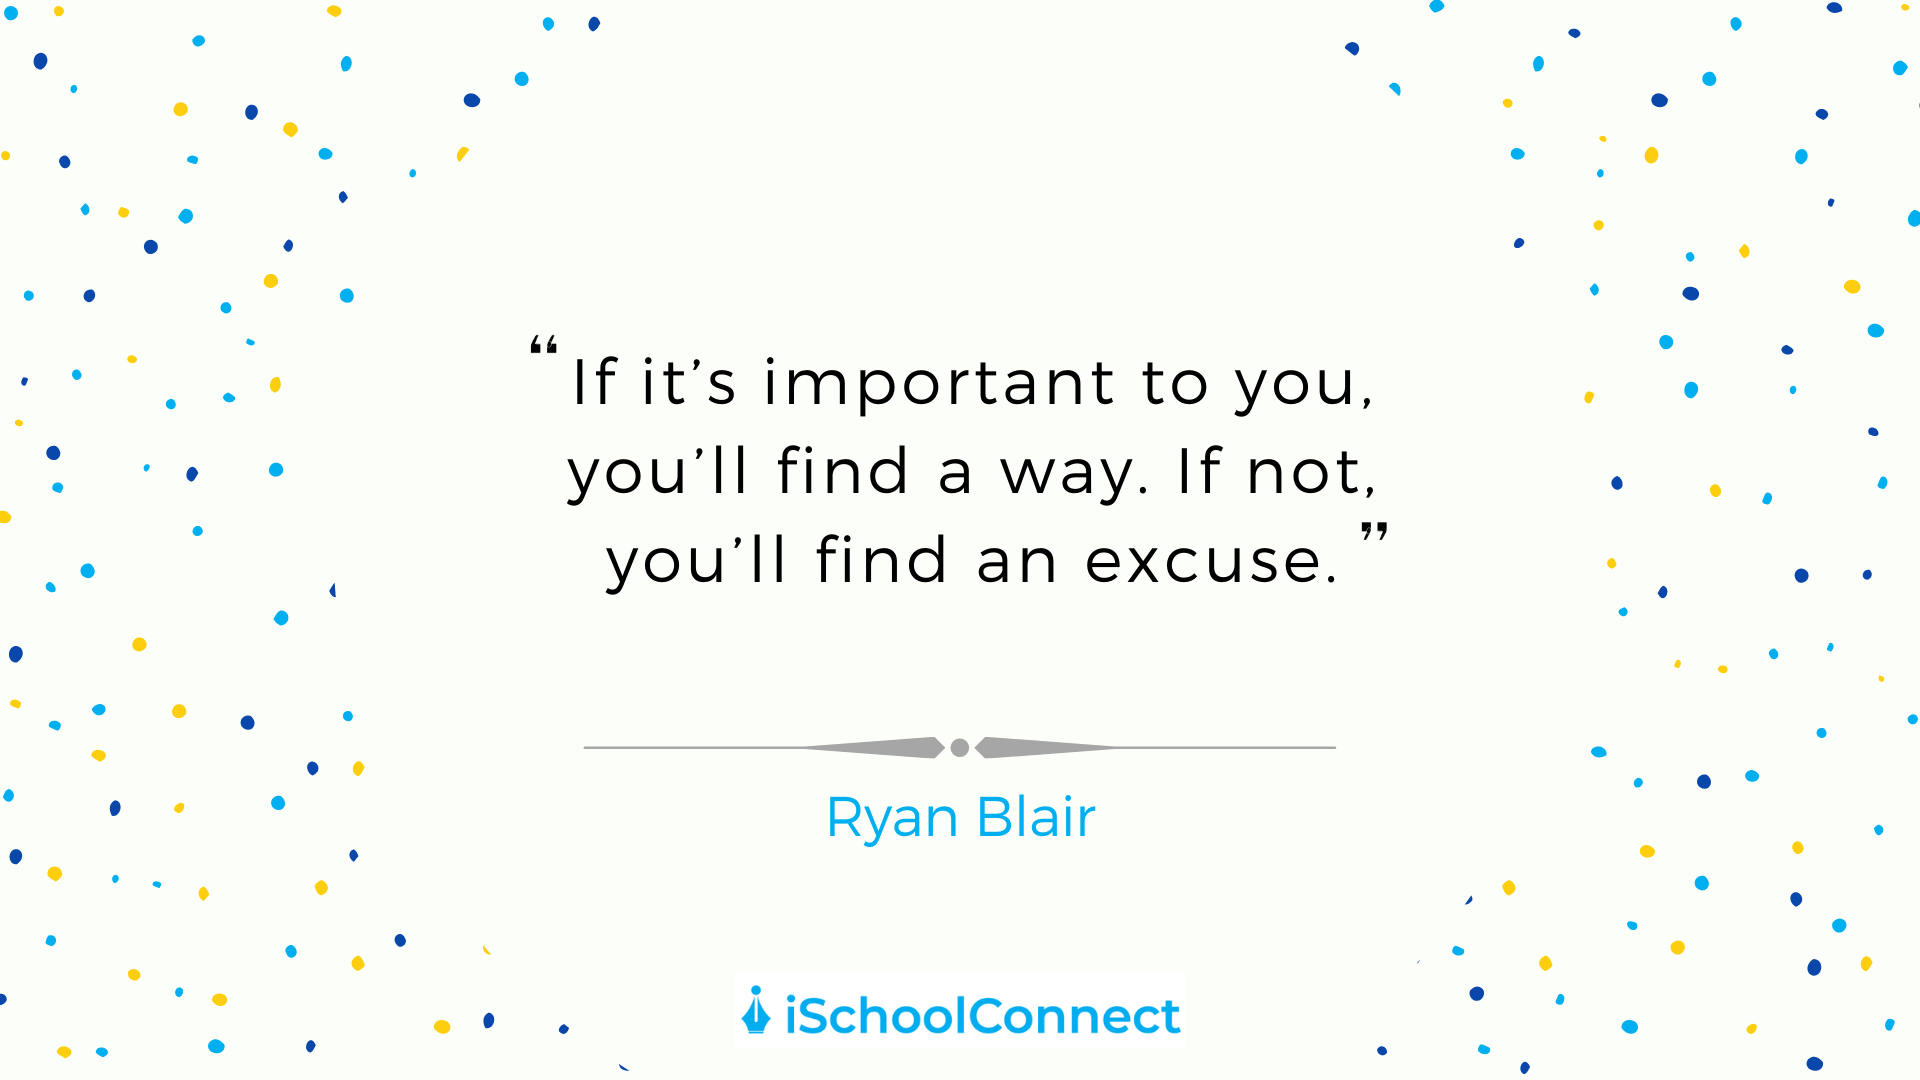 If it's important to you, you will find a way. If not, you'll find an excuse" - Ryan Blair